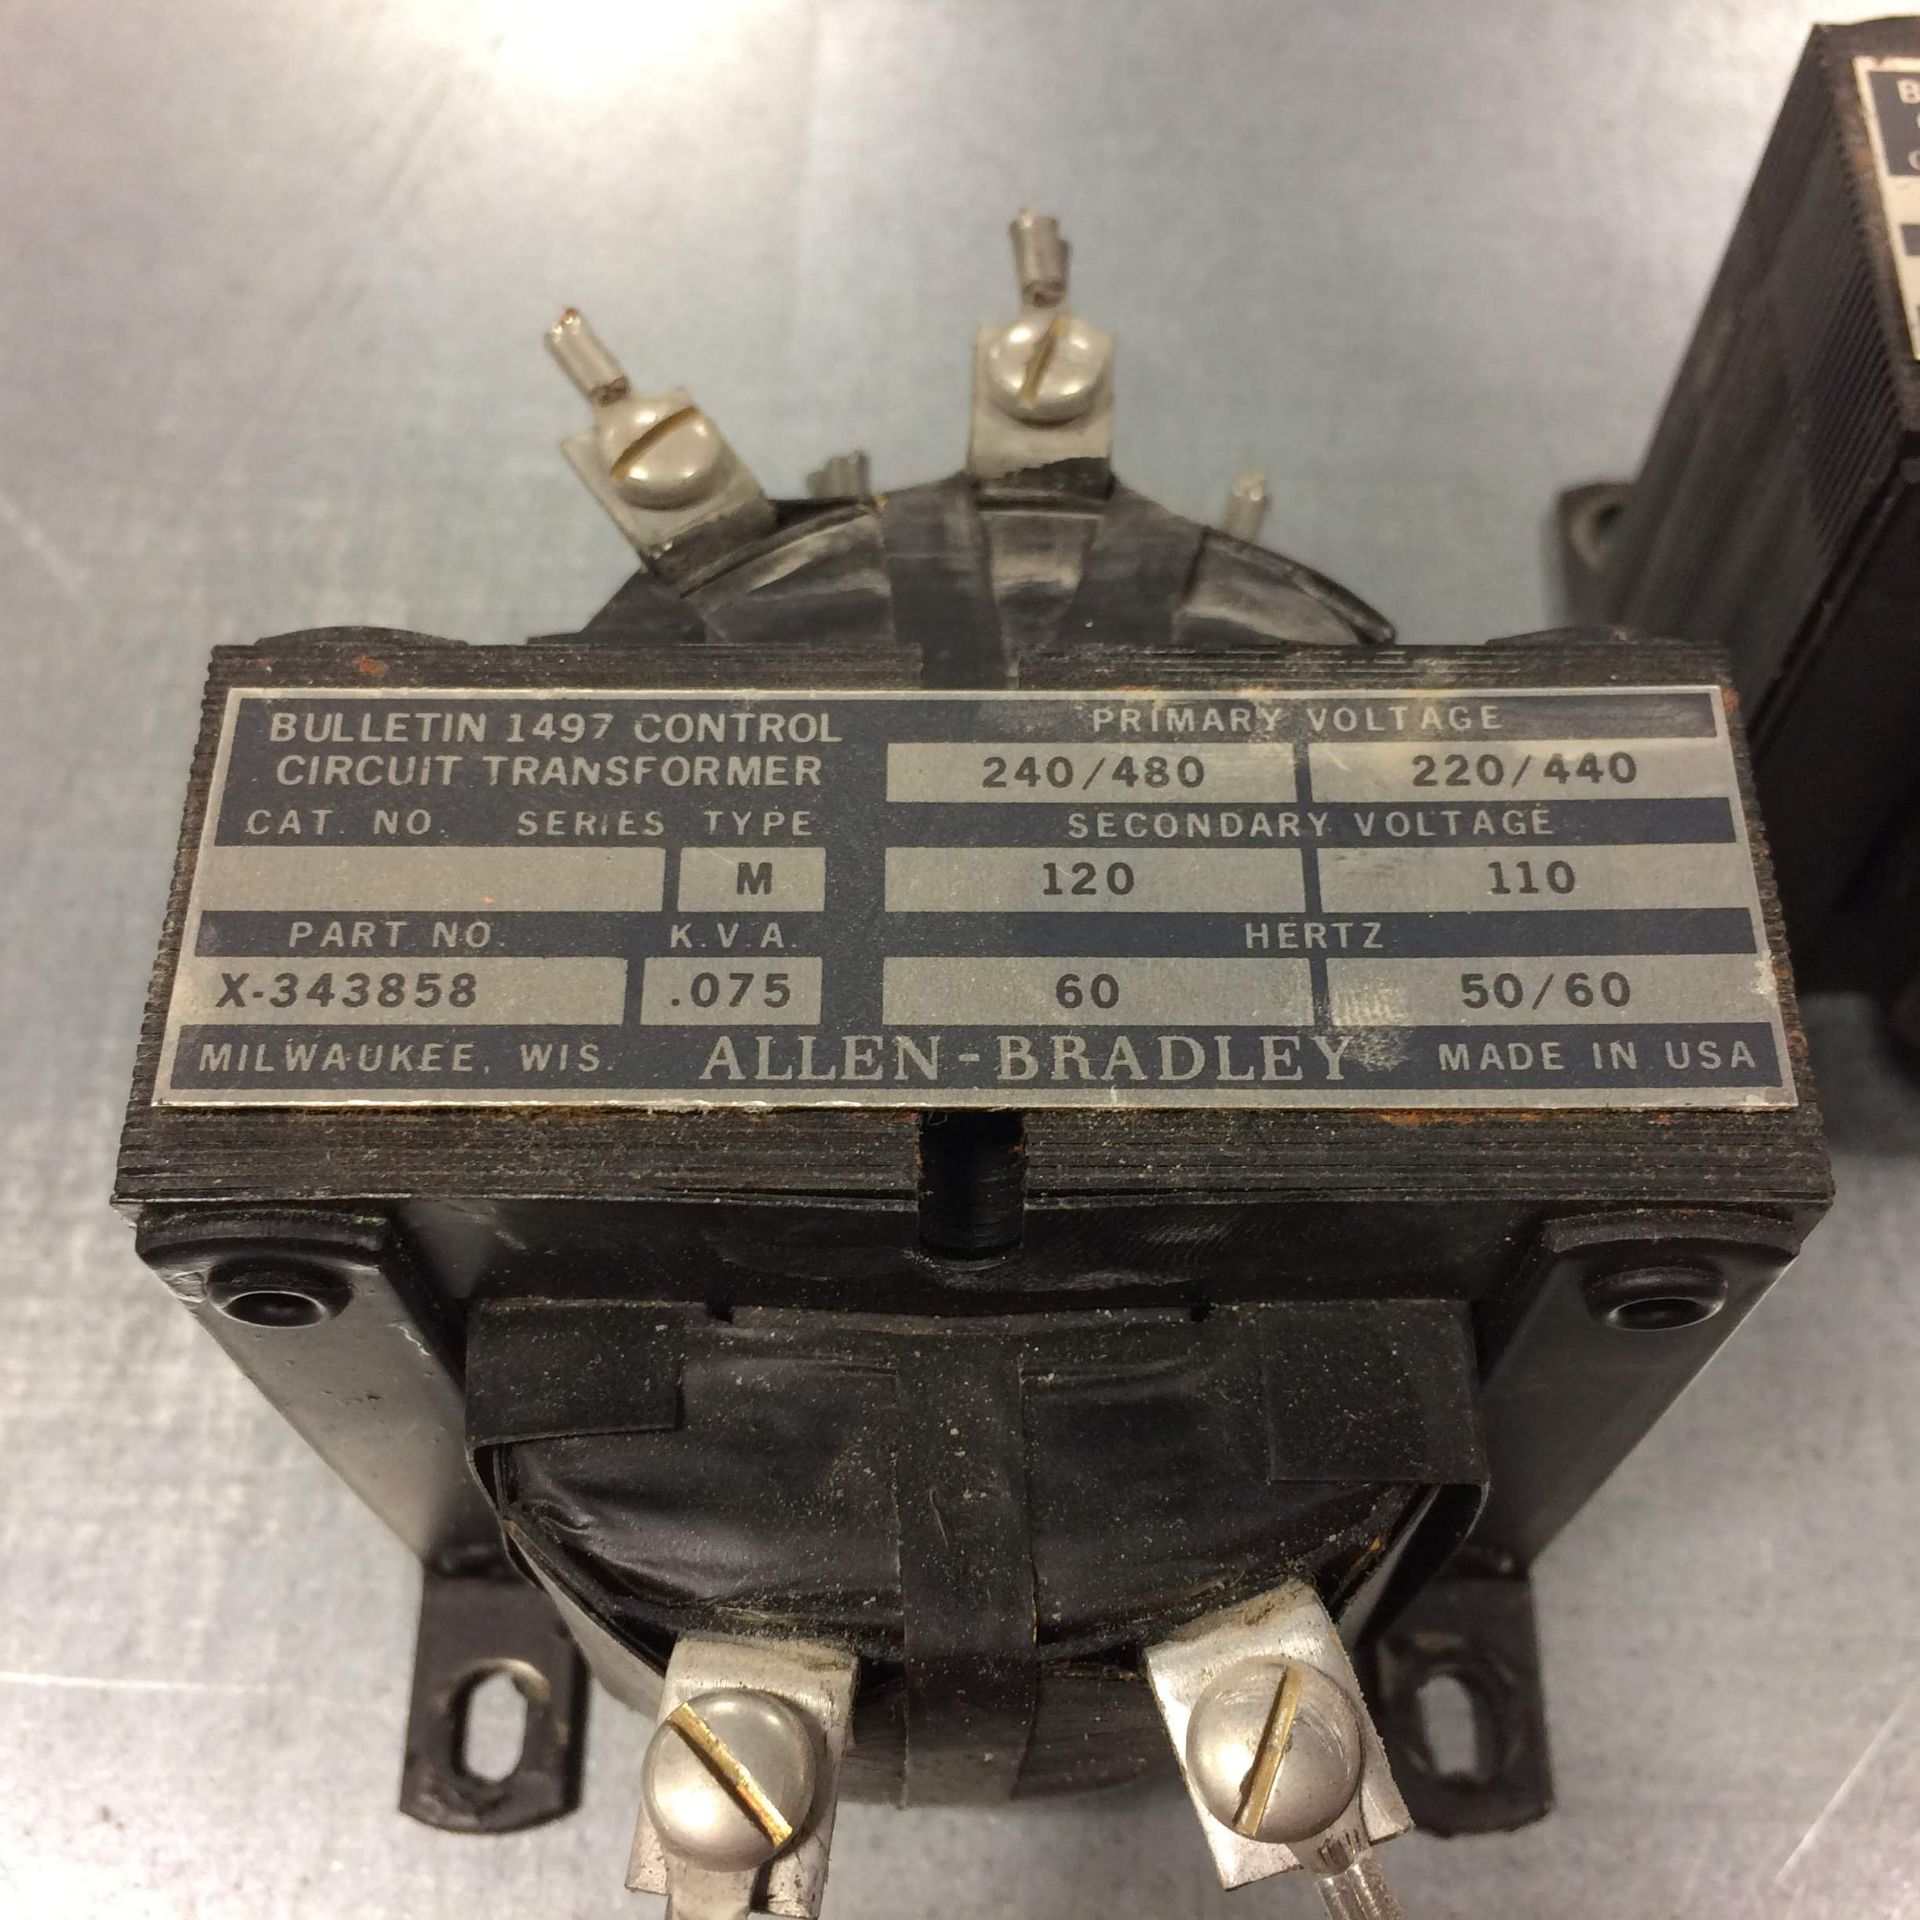 (2) X-343858 ALLEN BRADLEY TRANSFORMERS USED. Pickup your lot(s) for free! Shipping is available for - Image 5 of 5